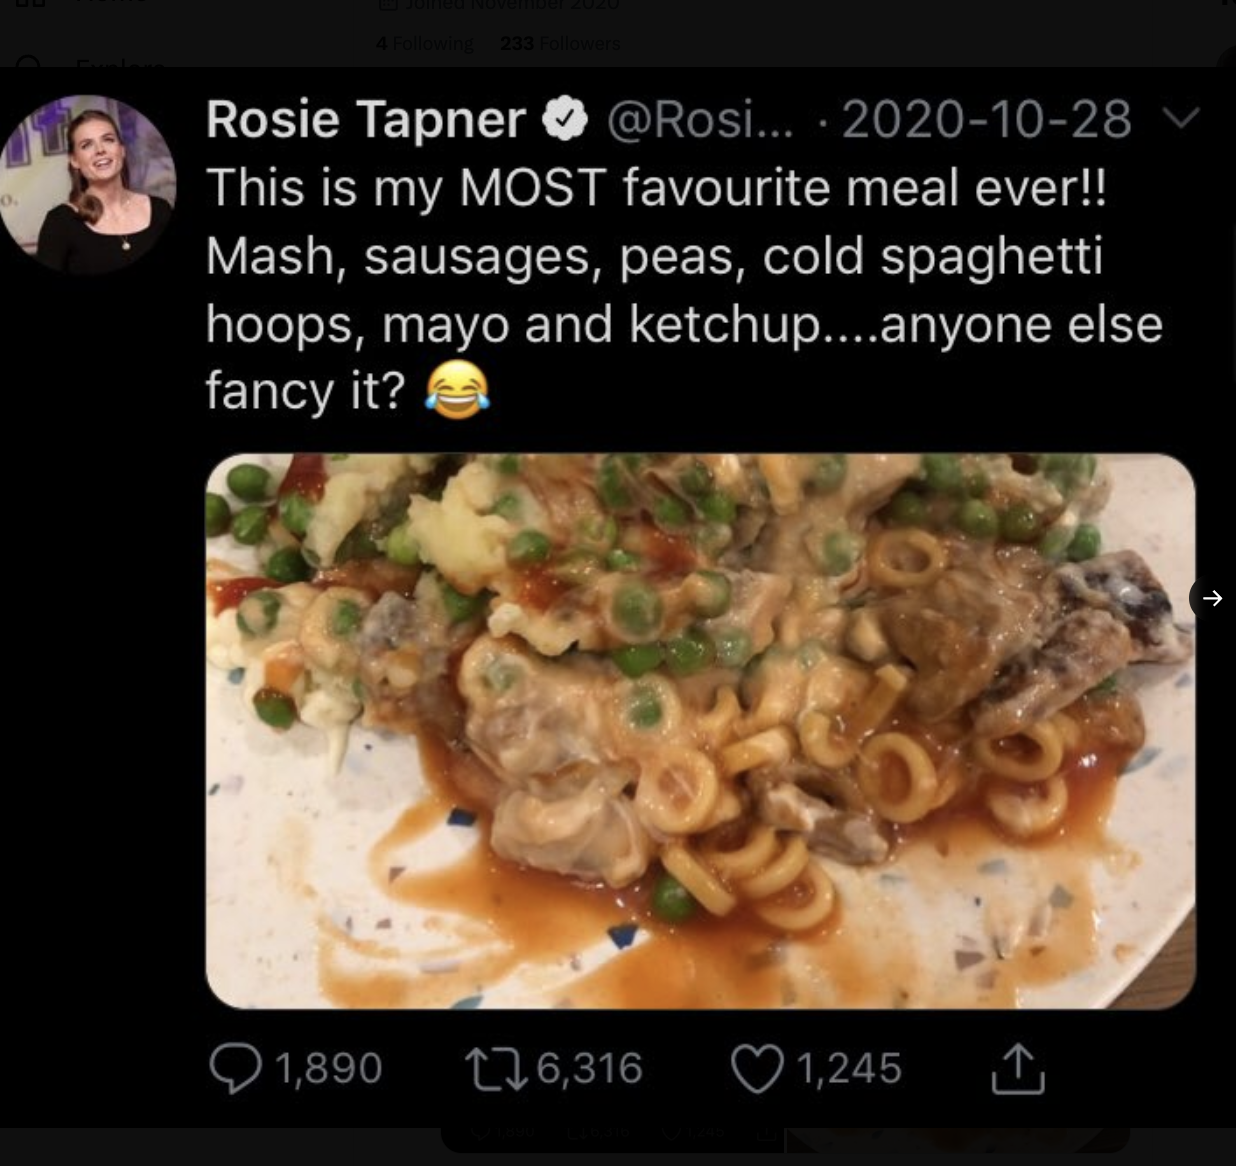 yakisoba - Rosie Tapner ... This is my Most favourite meal ever!!! Mash, sausages, peas, cold spaghetti hoops, mayo and ketchup....anyone else fancy it? 1,890 176,316 1,245 A